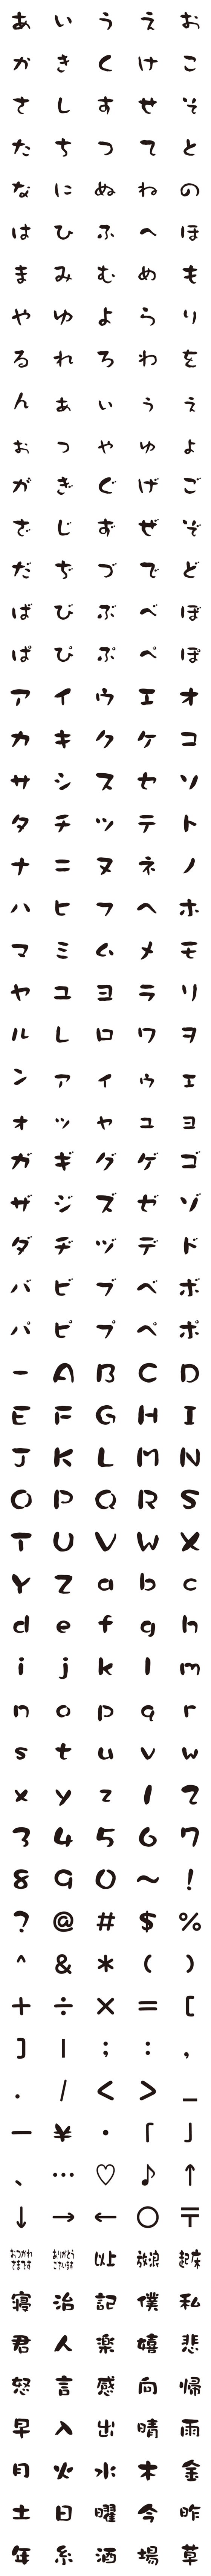 [LINE絵文字]DFクラフト墨 フォント絵文字の画像一覧